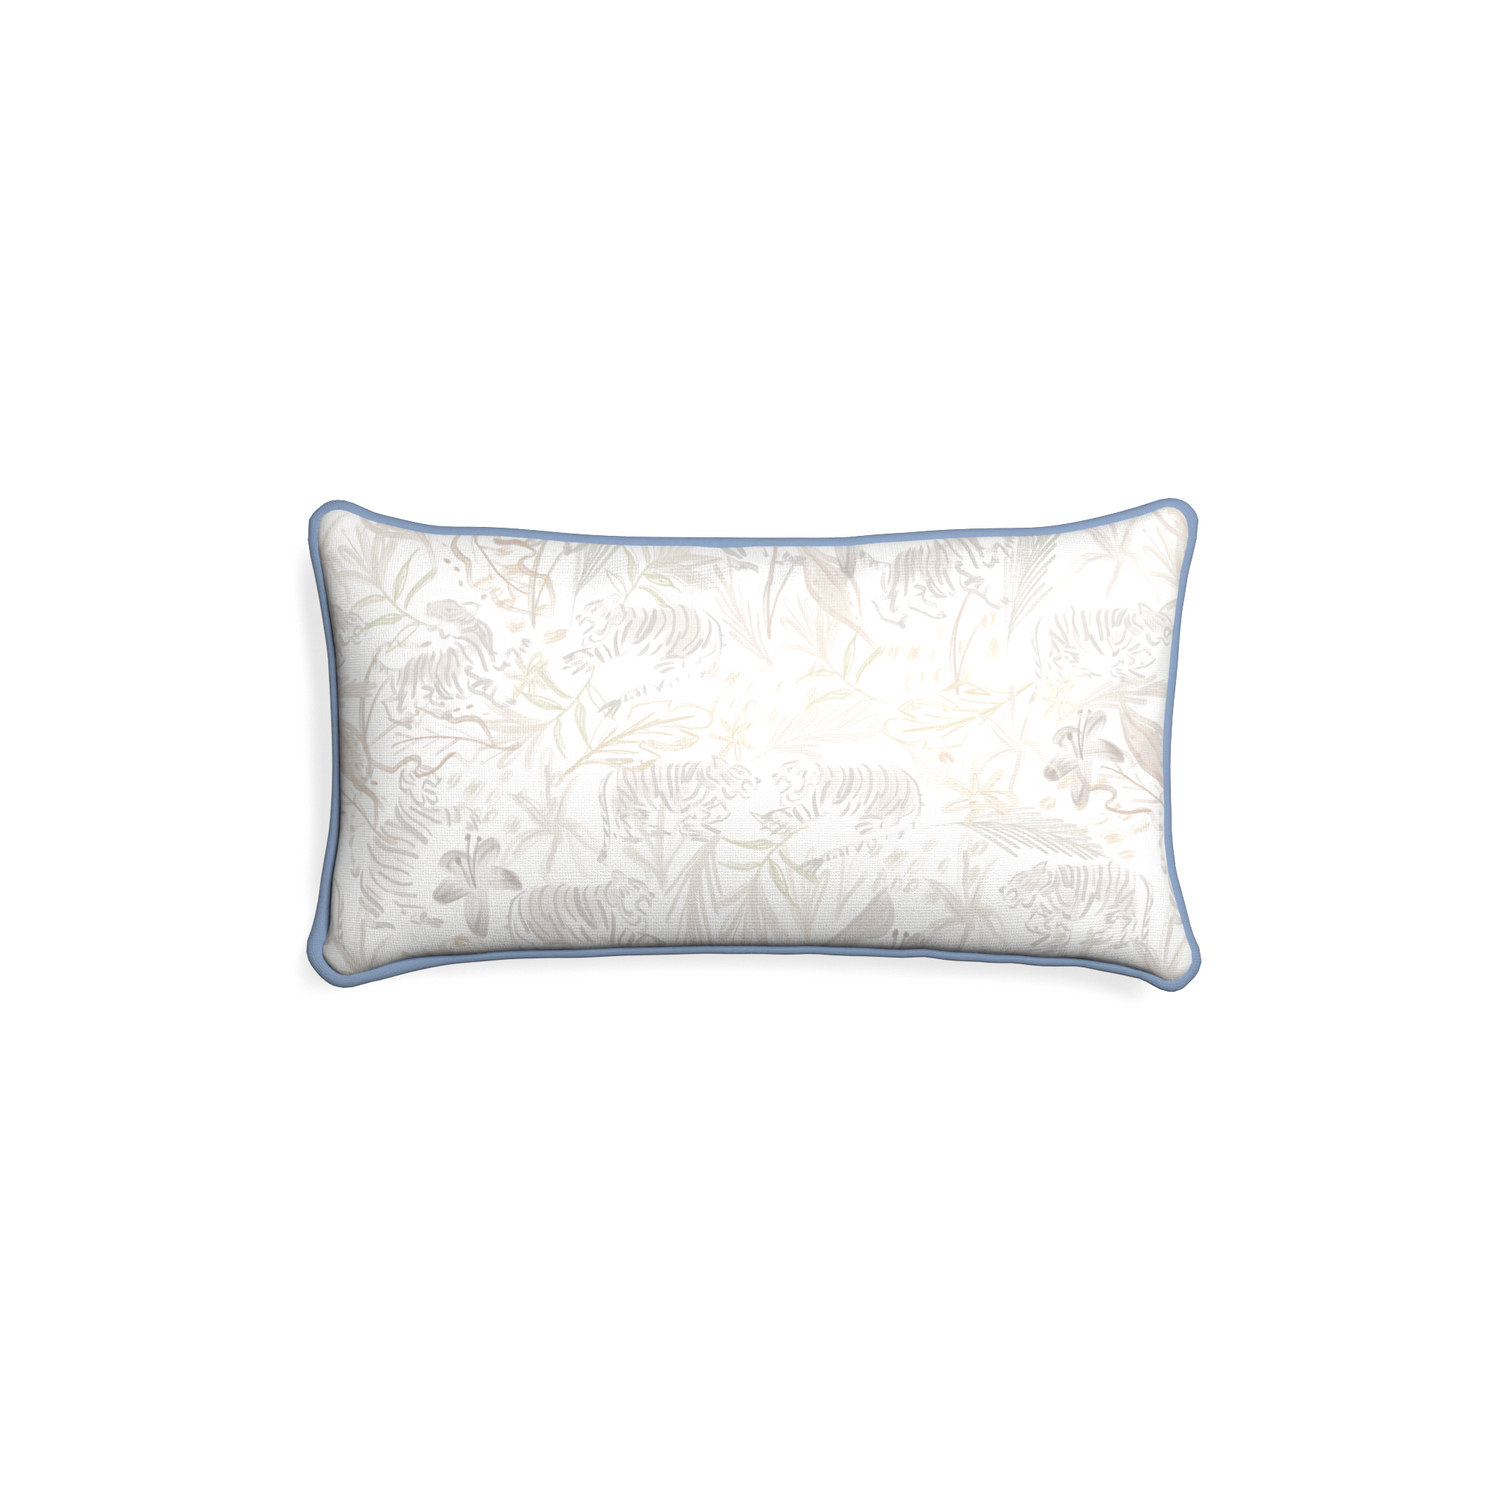 Petite-lumbar frida sand custom beige chinoiserie tigerpillow with sky piping on white background